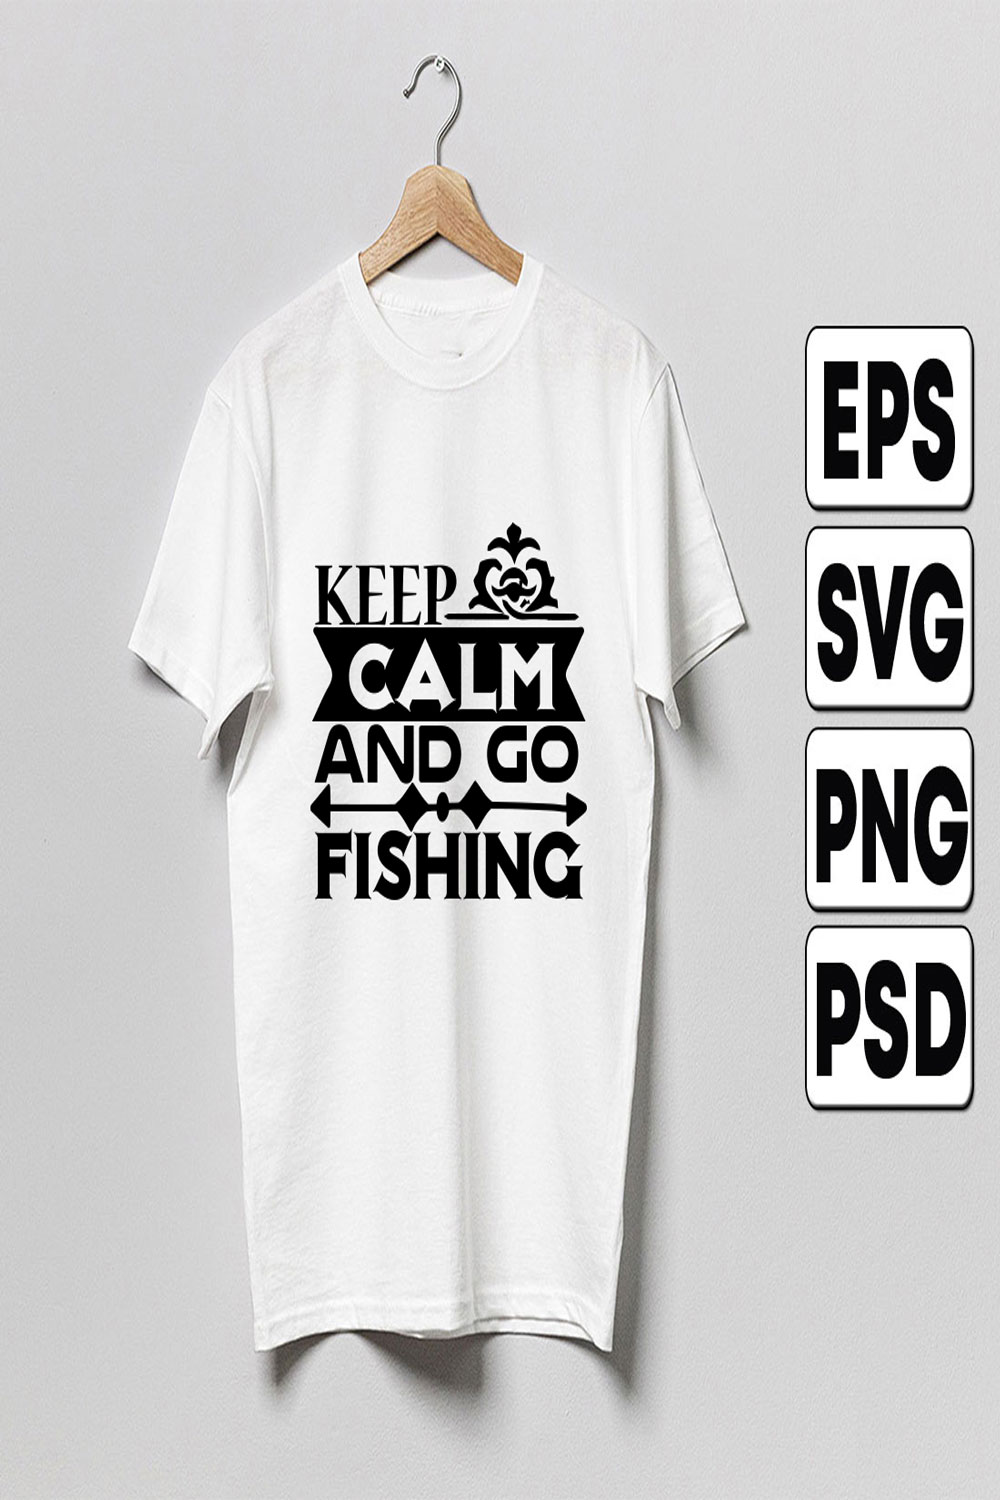 Keep-calm-and-fishing pinterest preview image.